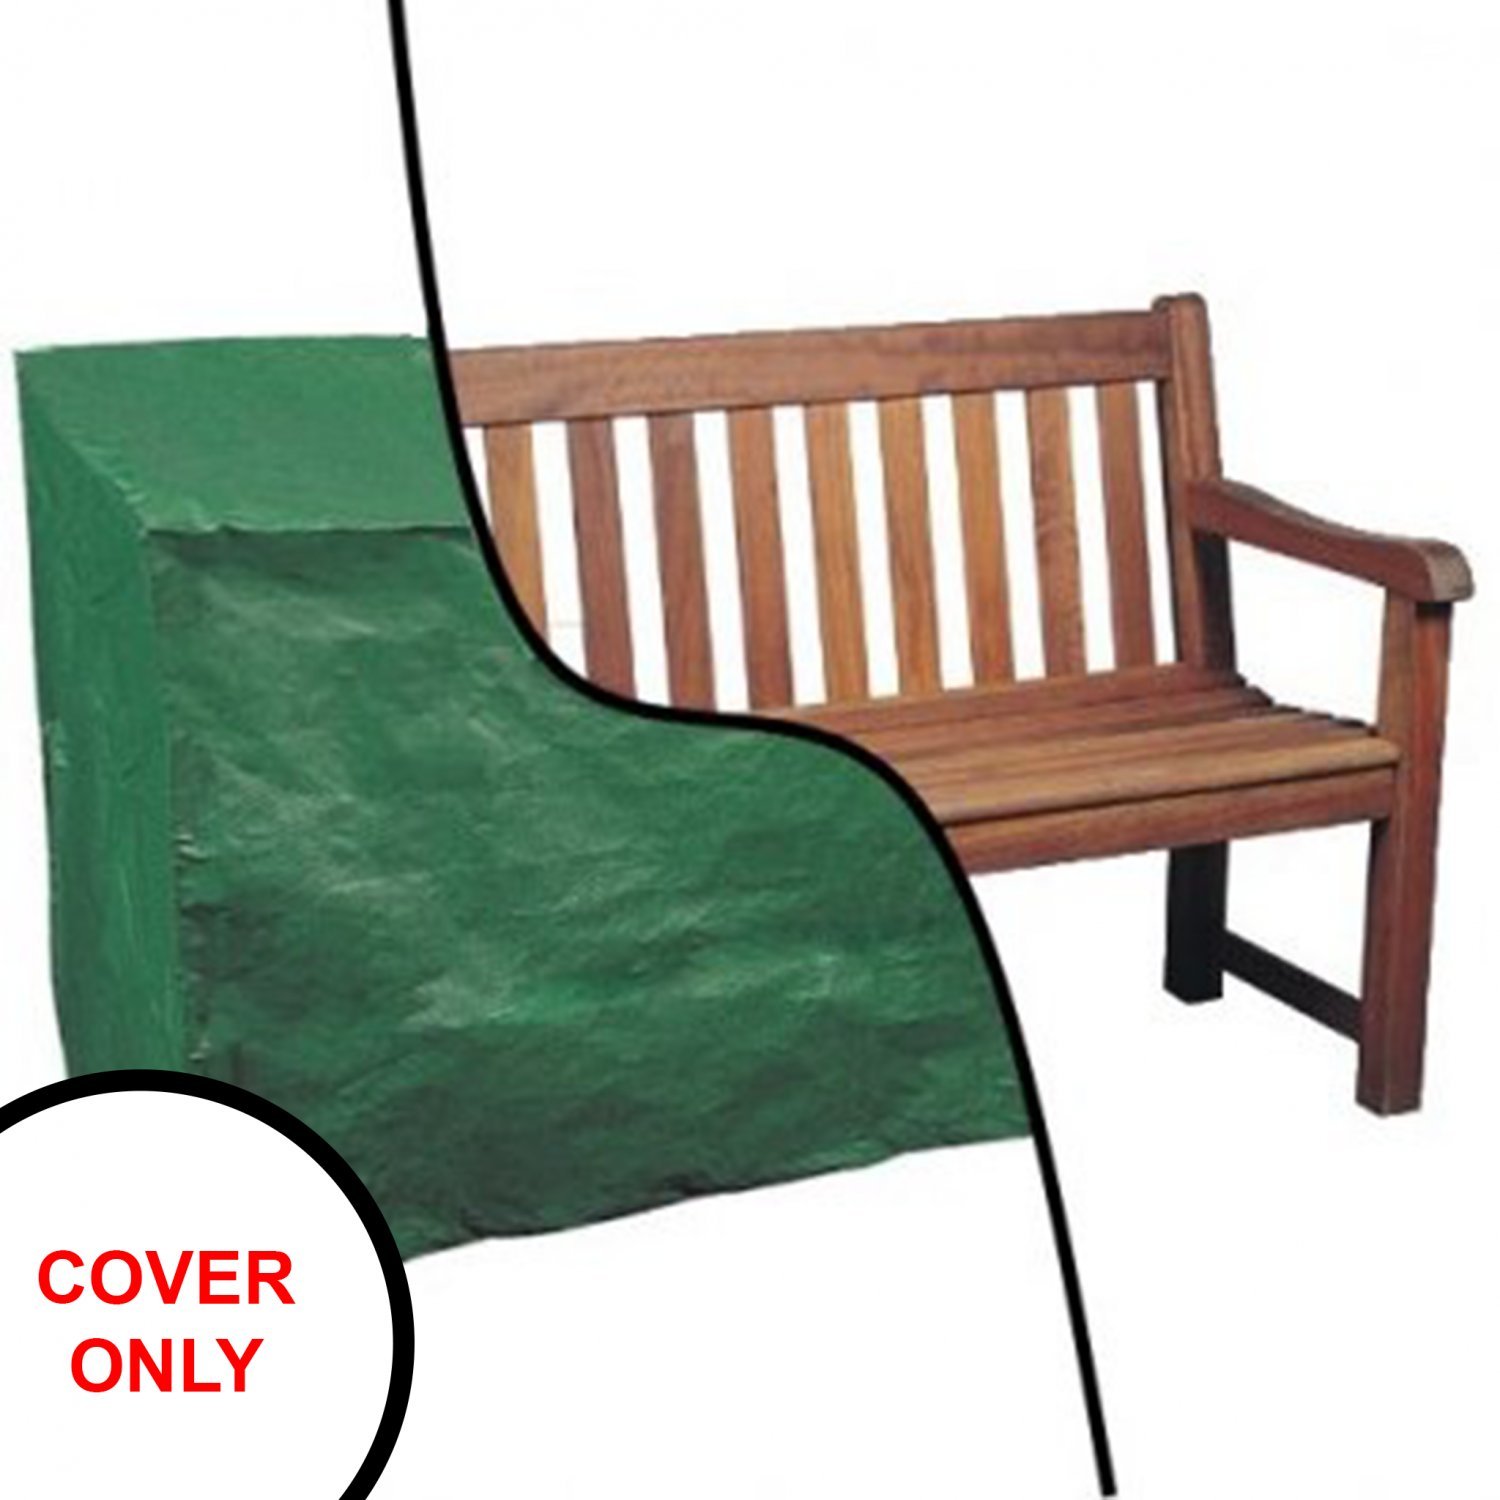 Waterproof 6ft 1.8m Garden Furniture 4 Seater Bench Seat Cover - Click Image to Close